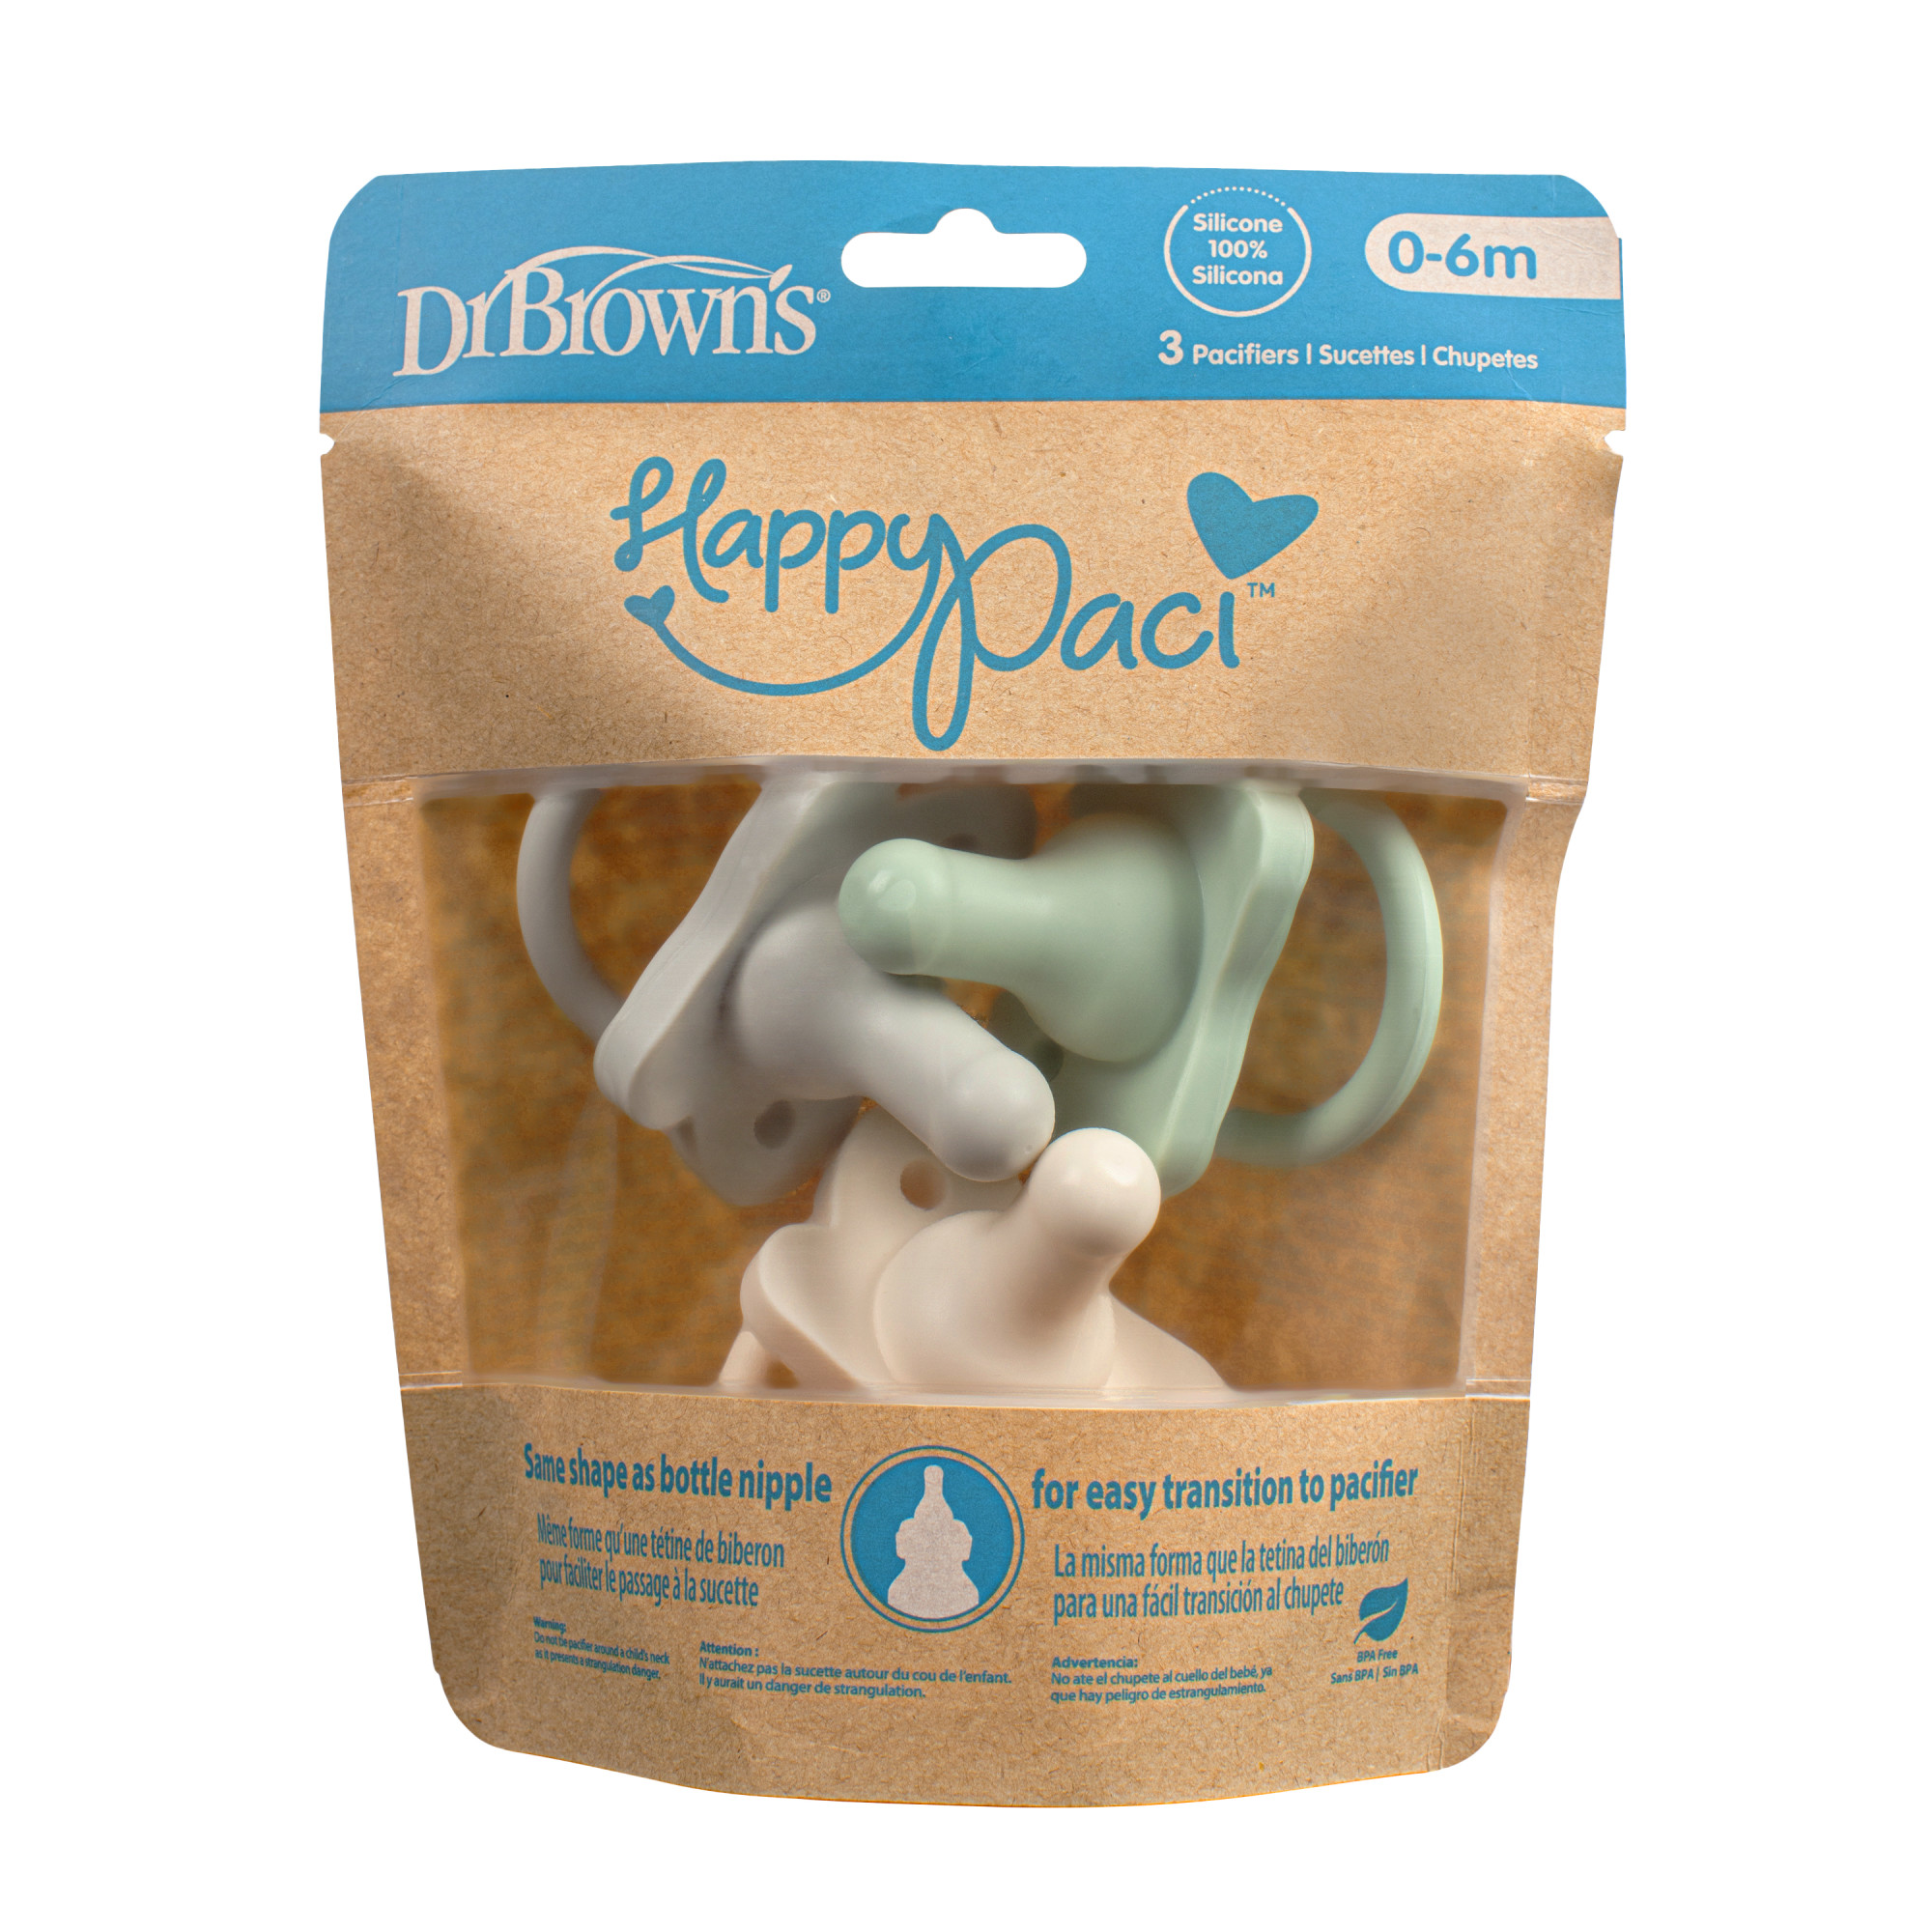 Dr. Brown's HappyPaci 100% Silicone Pacifier 0-6m, BPA Free, Cool Gray, Green, Ecru, 3 Pack - image 3 of 19